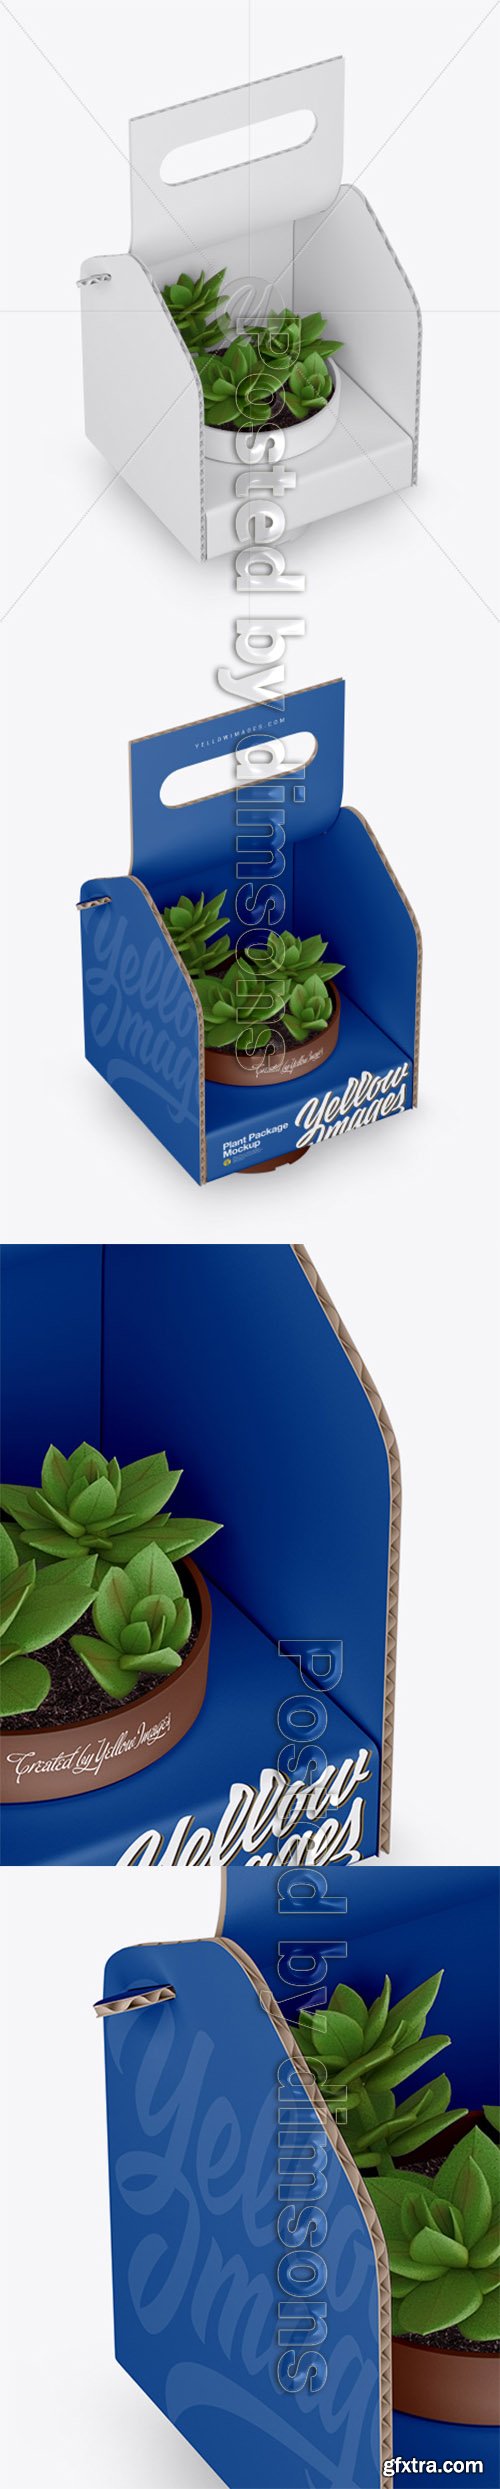 Box with Plant Mockup - Half Side View 30926